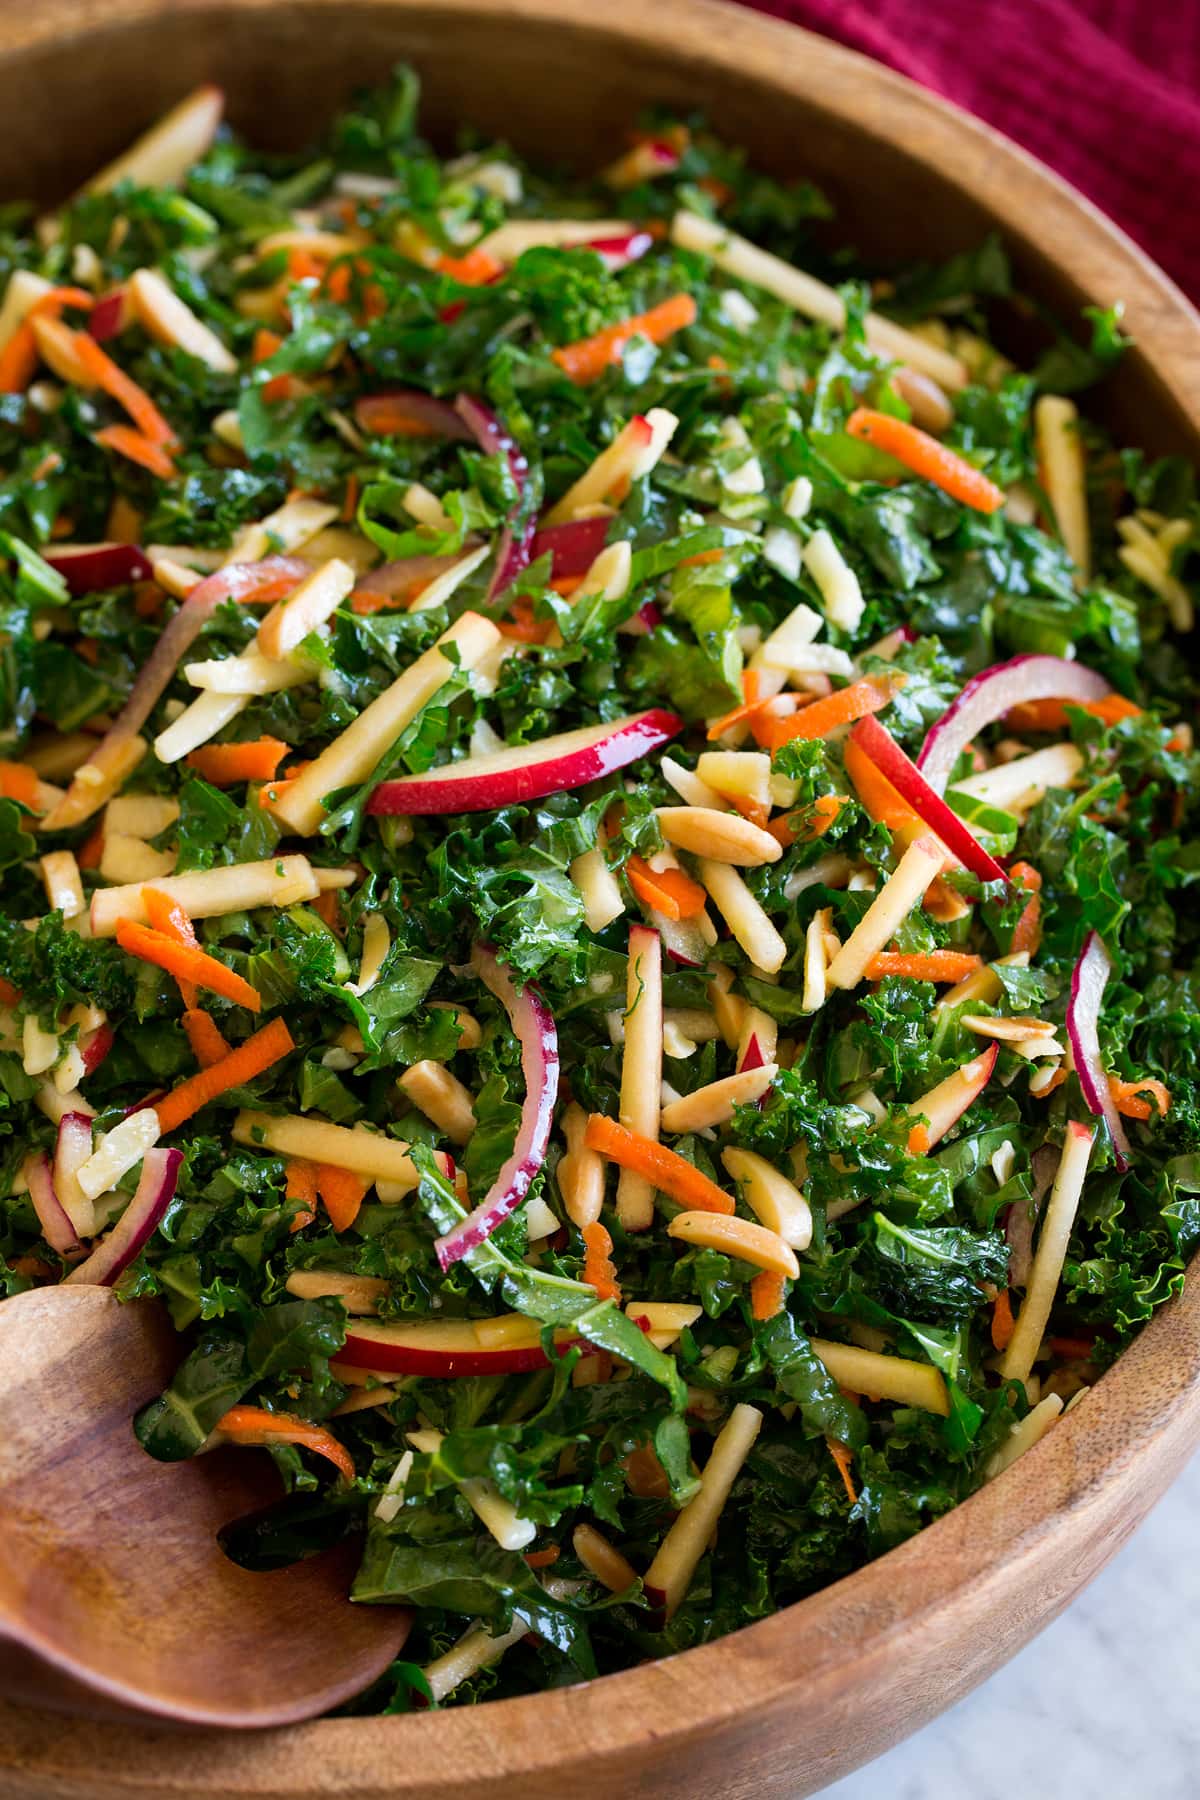 Photo: Shredded kale salad shown close up on a bowl.